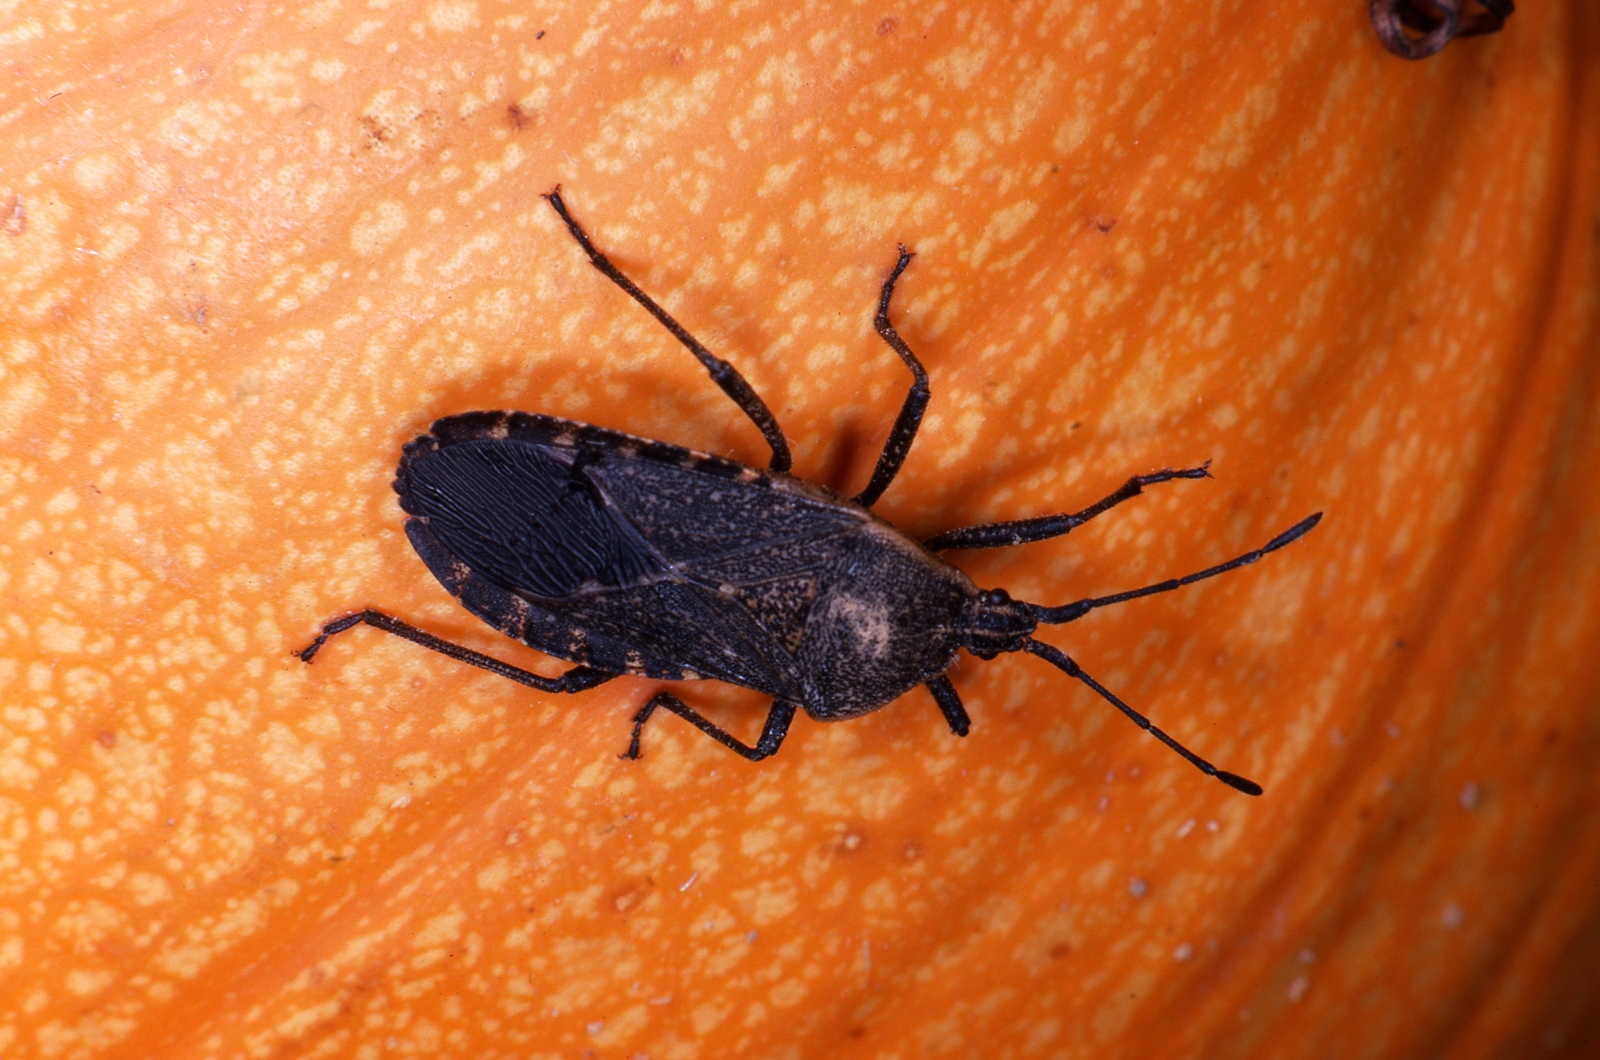 Open The squash bug prefers pumpkins, watermelons and squash.